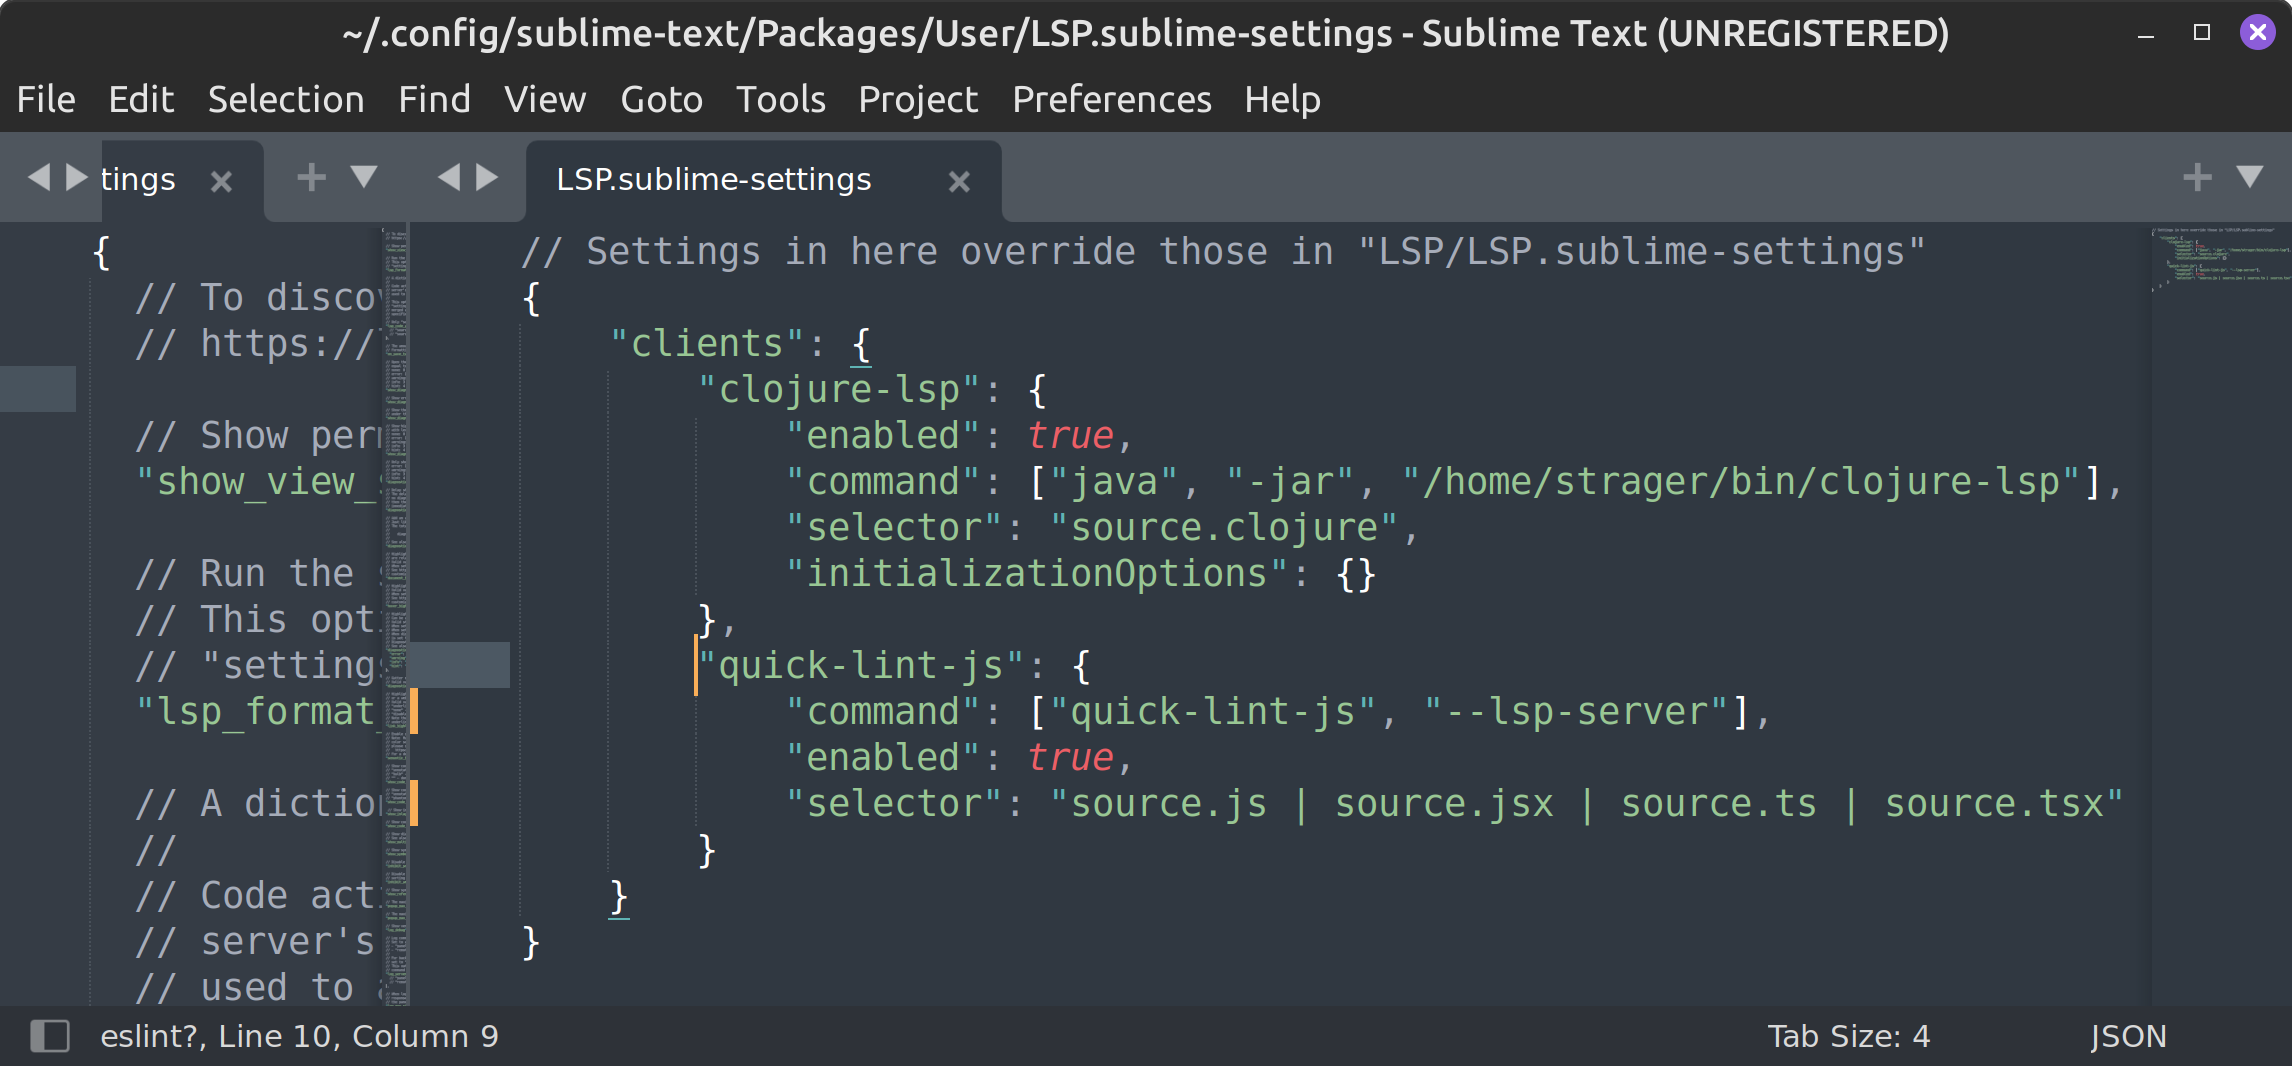 Sublime Text with LSP.sublime-settings open, showing closure-lsp and quick-lint-js settings